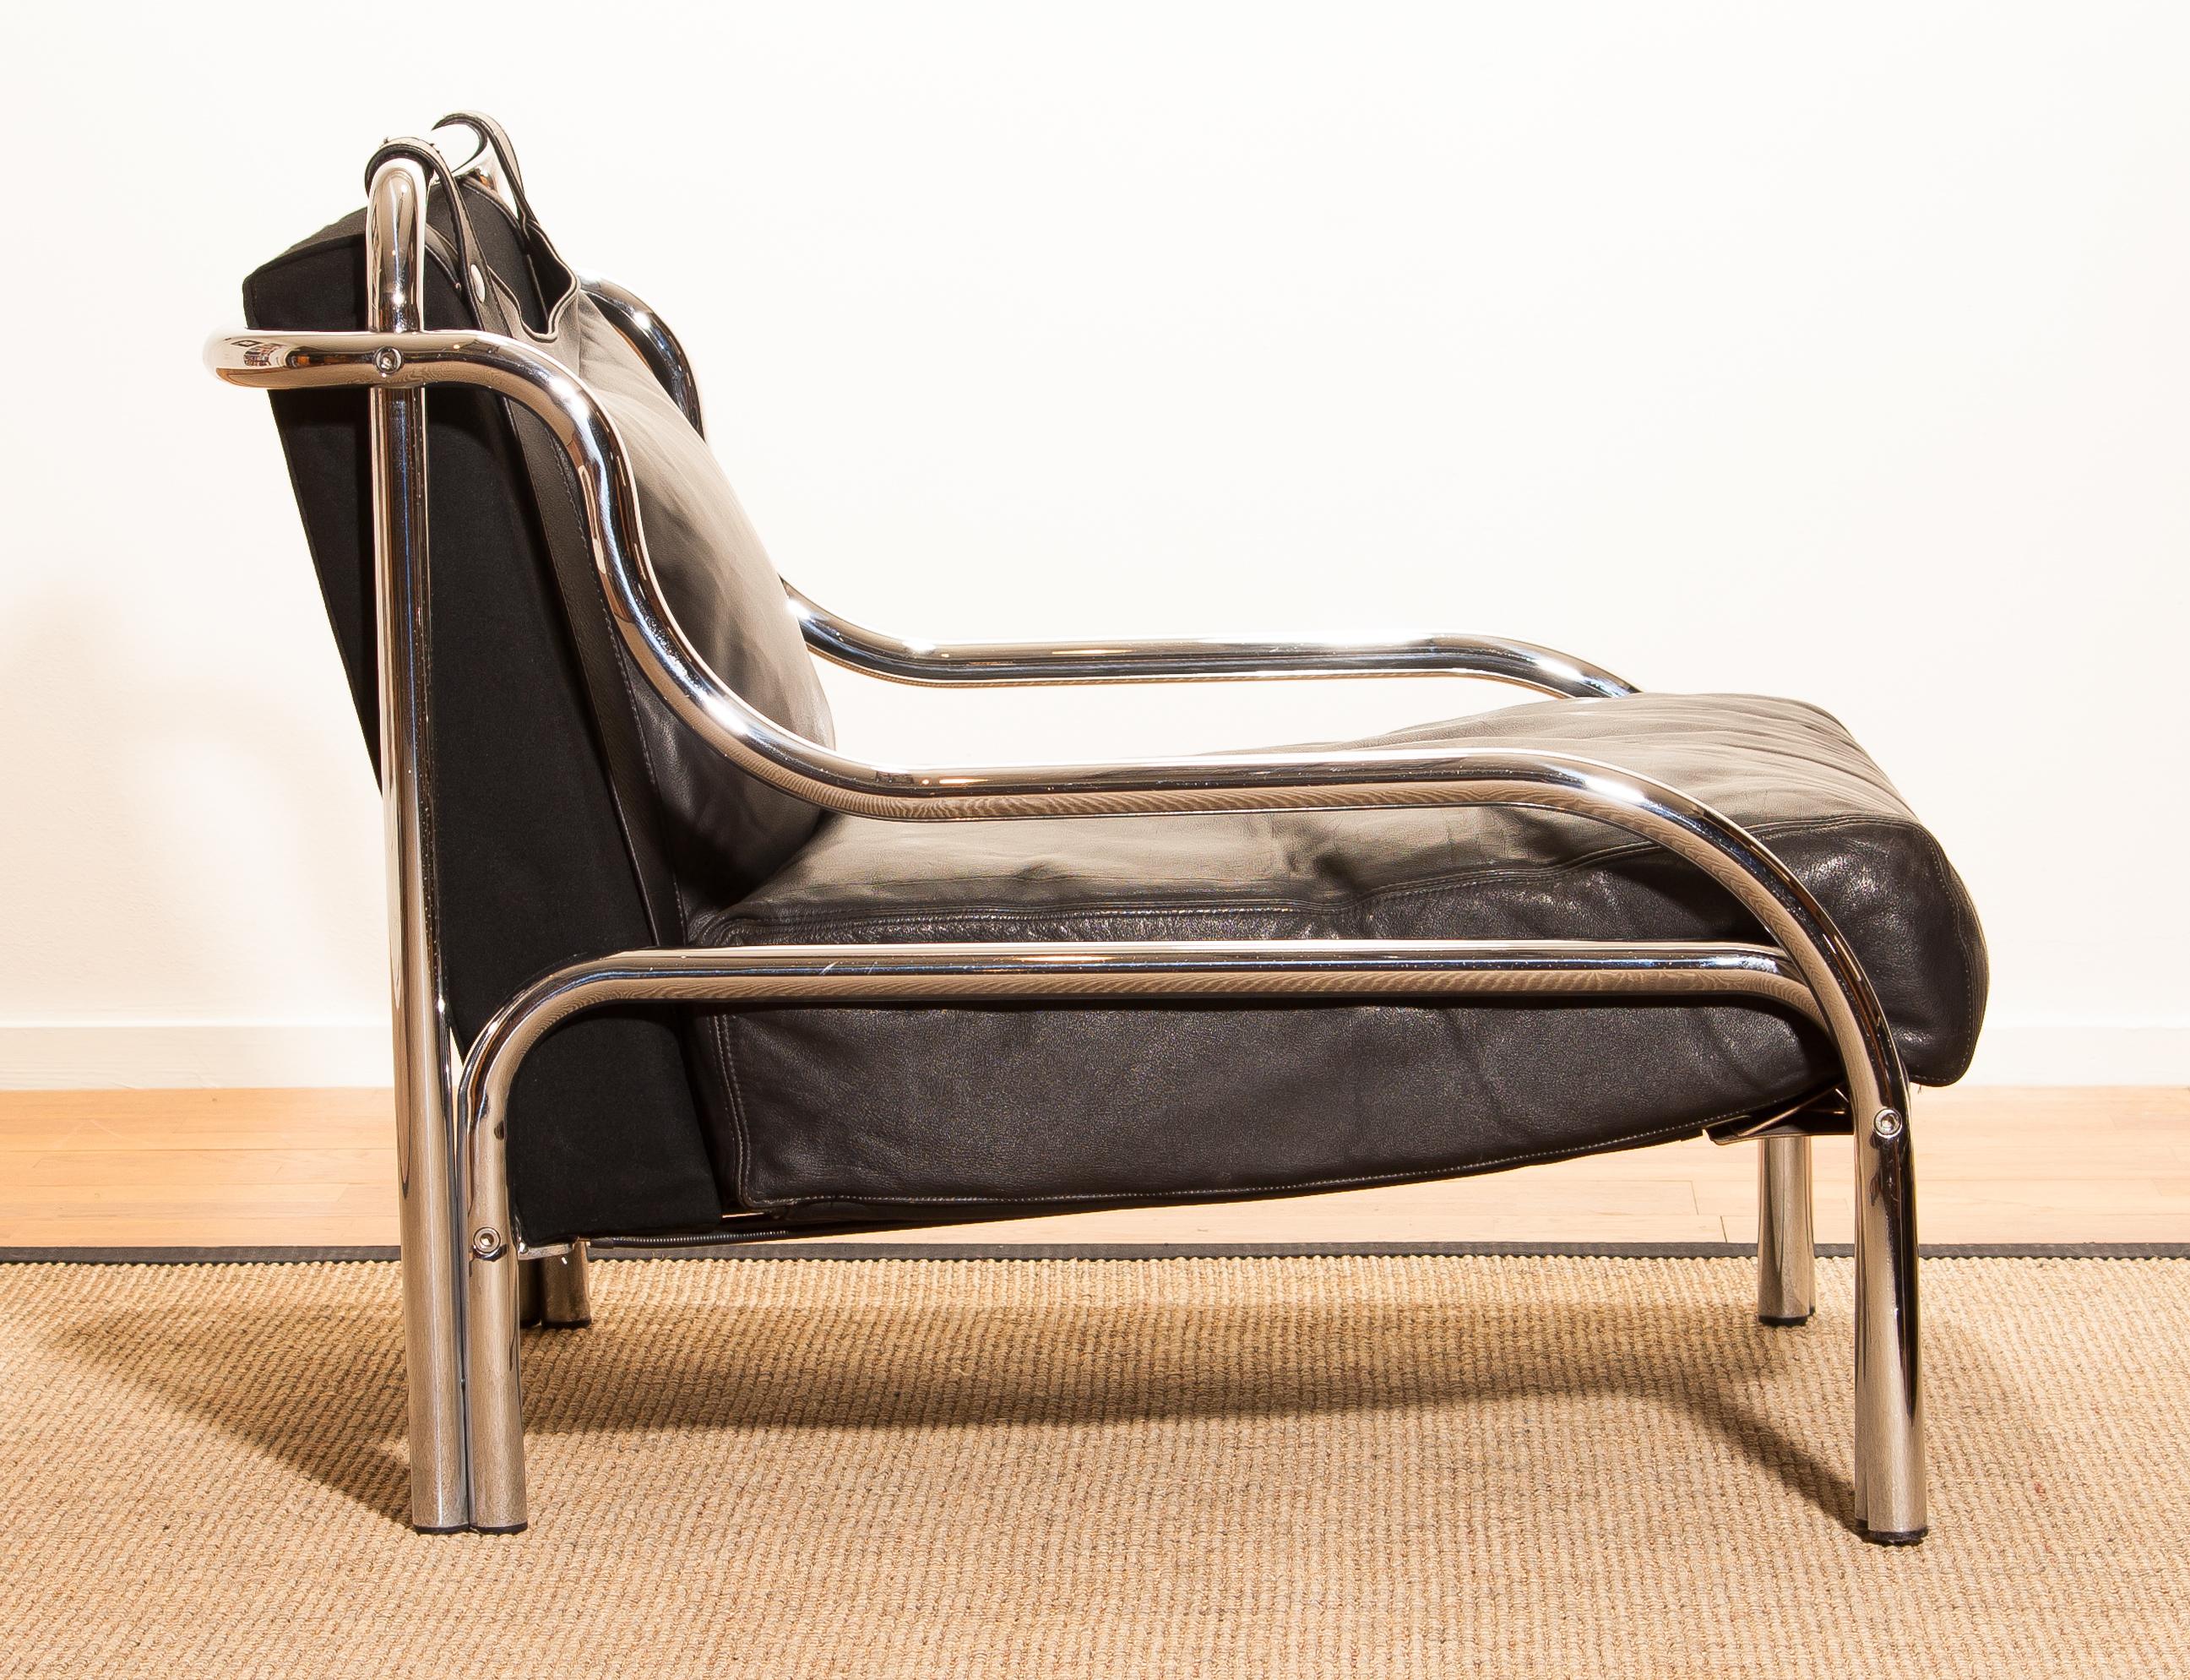 1960s Leather and Chrome Lounge Chair by Gae Aulenti for Poltronova 5